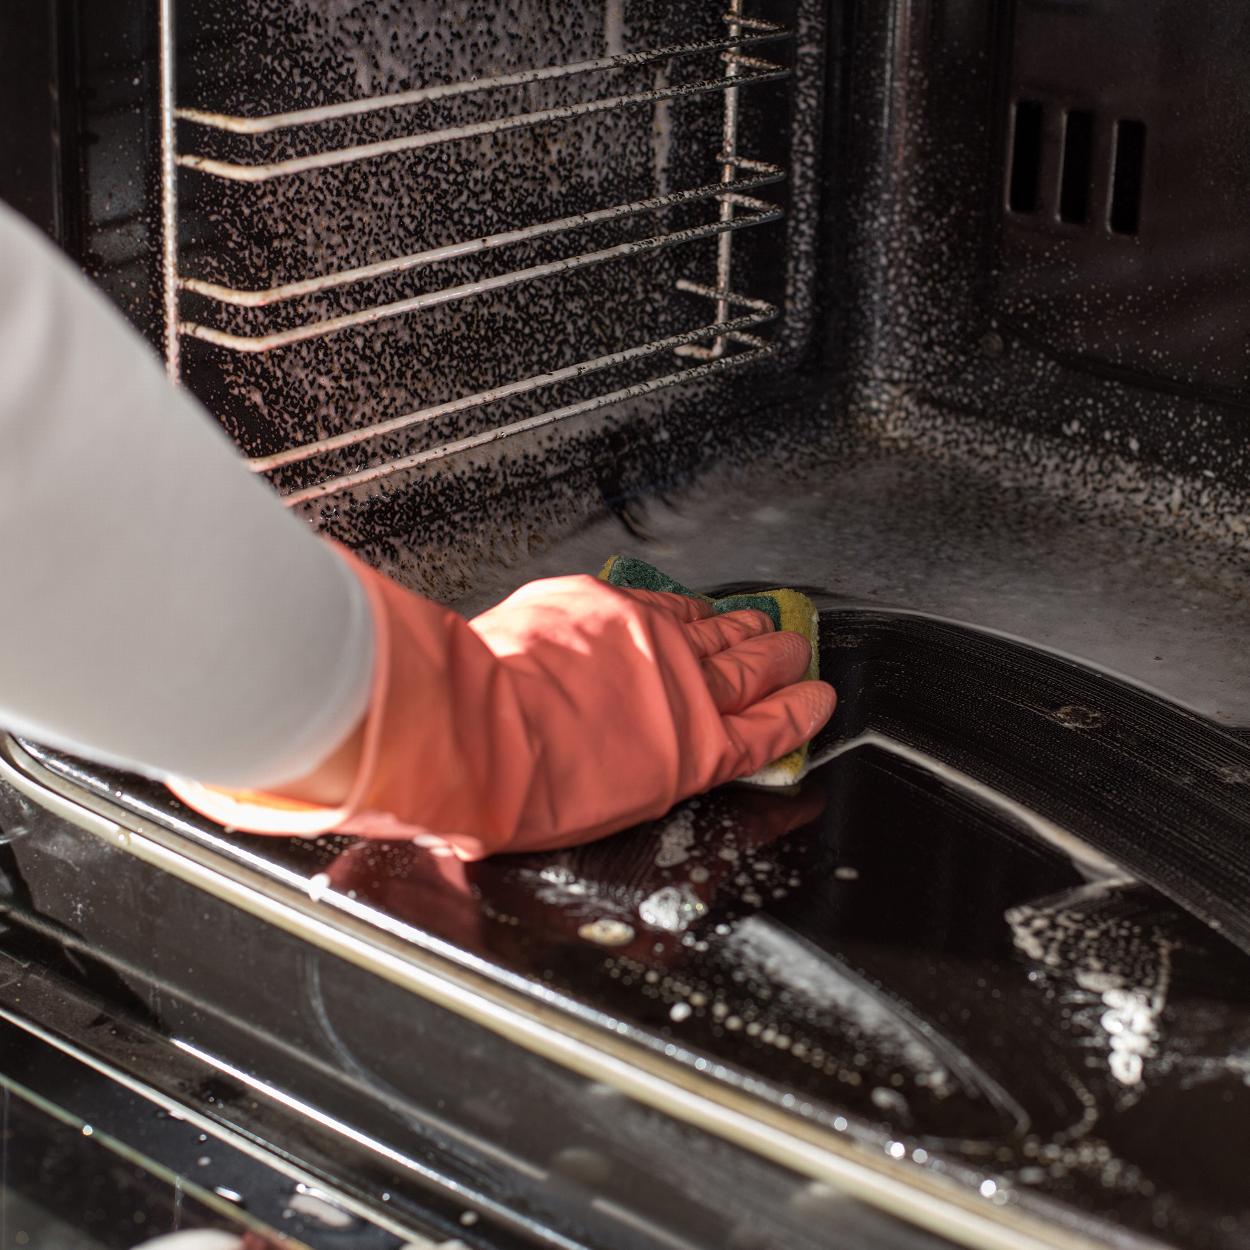 Cleaning out oven interior